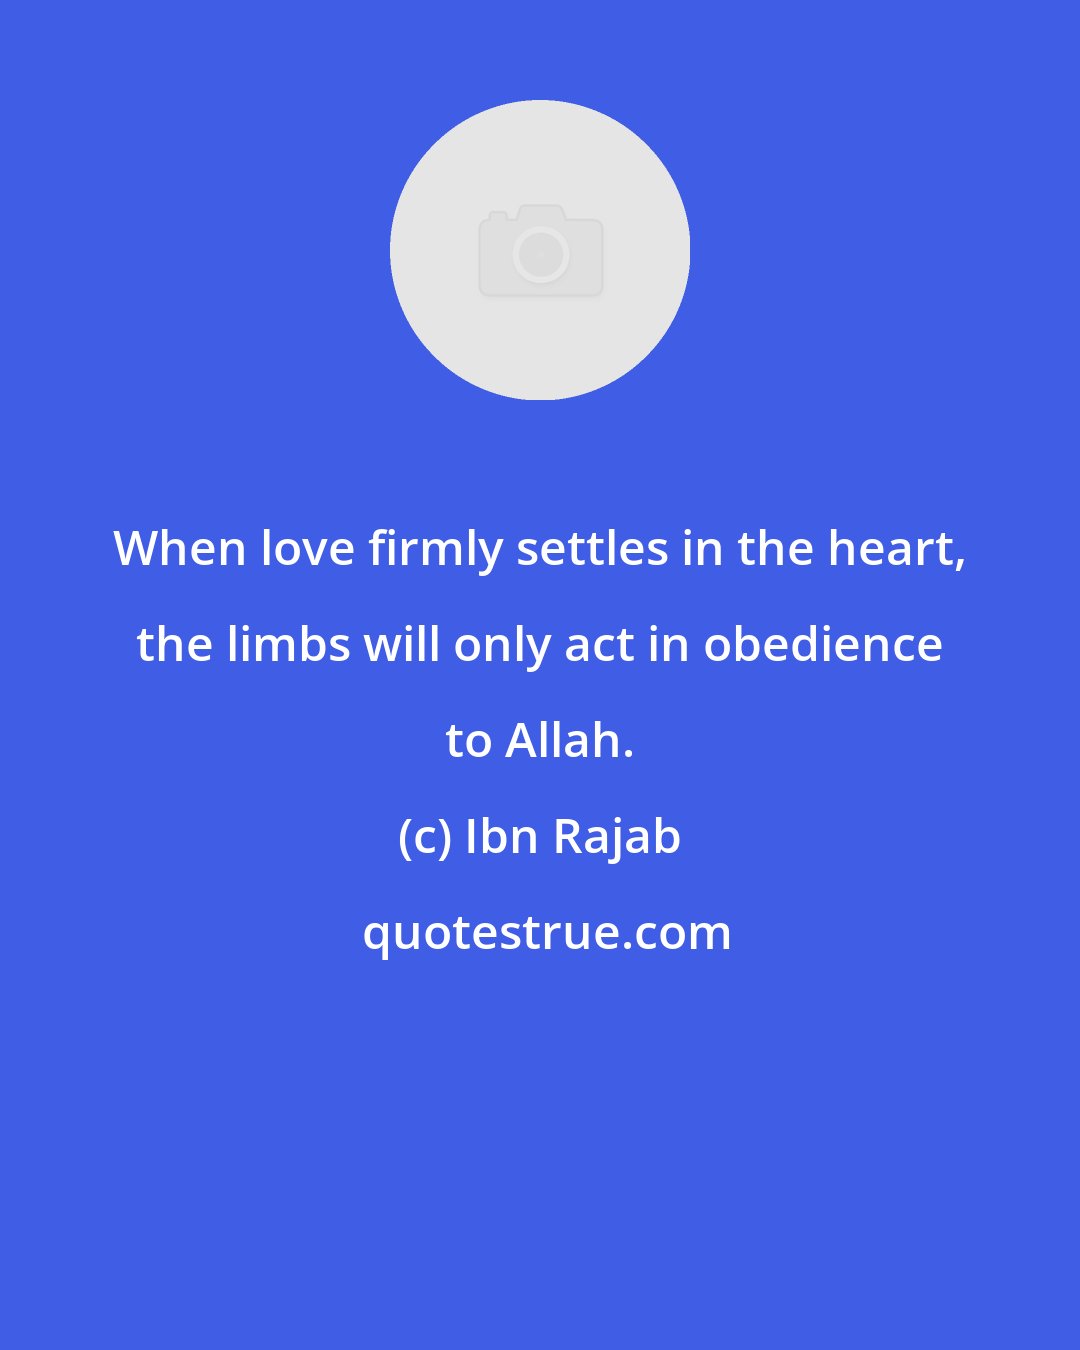 Ibn Rajab: When love firmly settles in the heart, the limbs will only act in obedience to Allah.